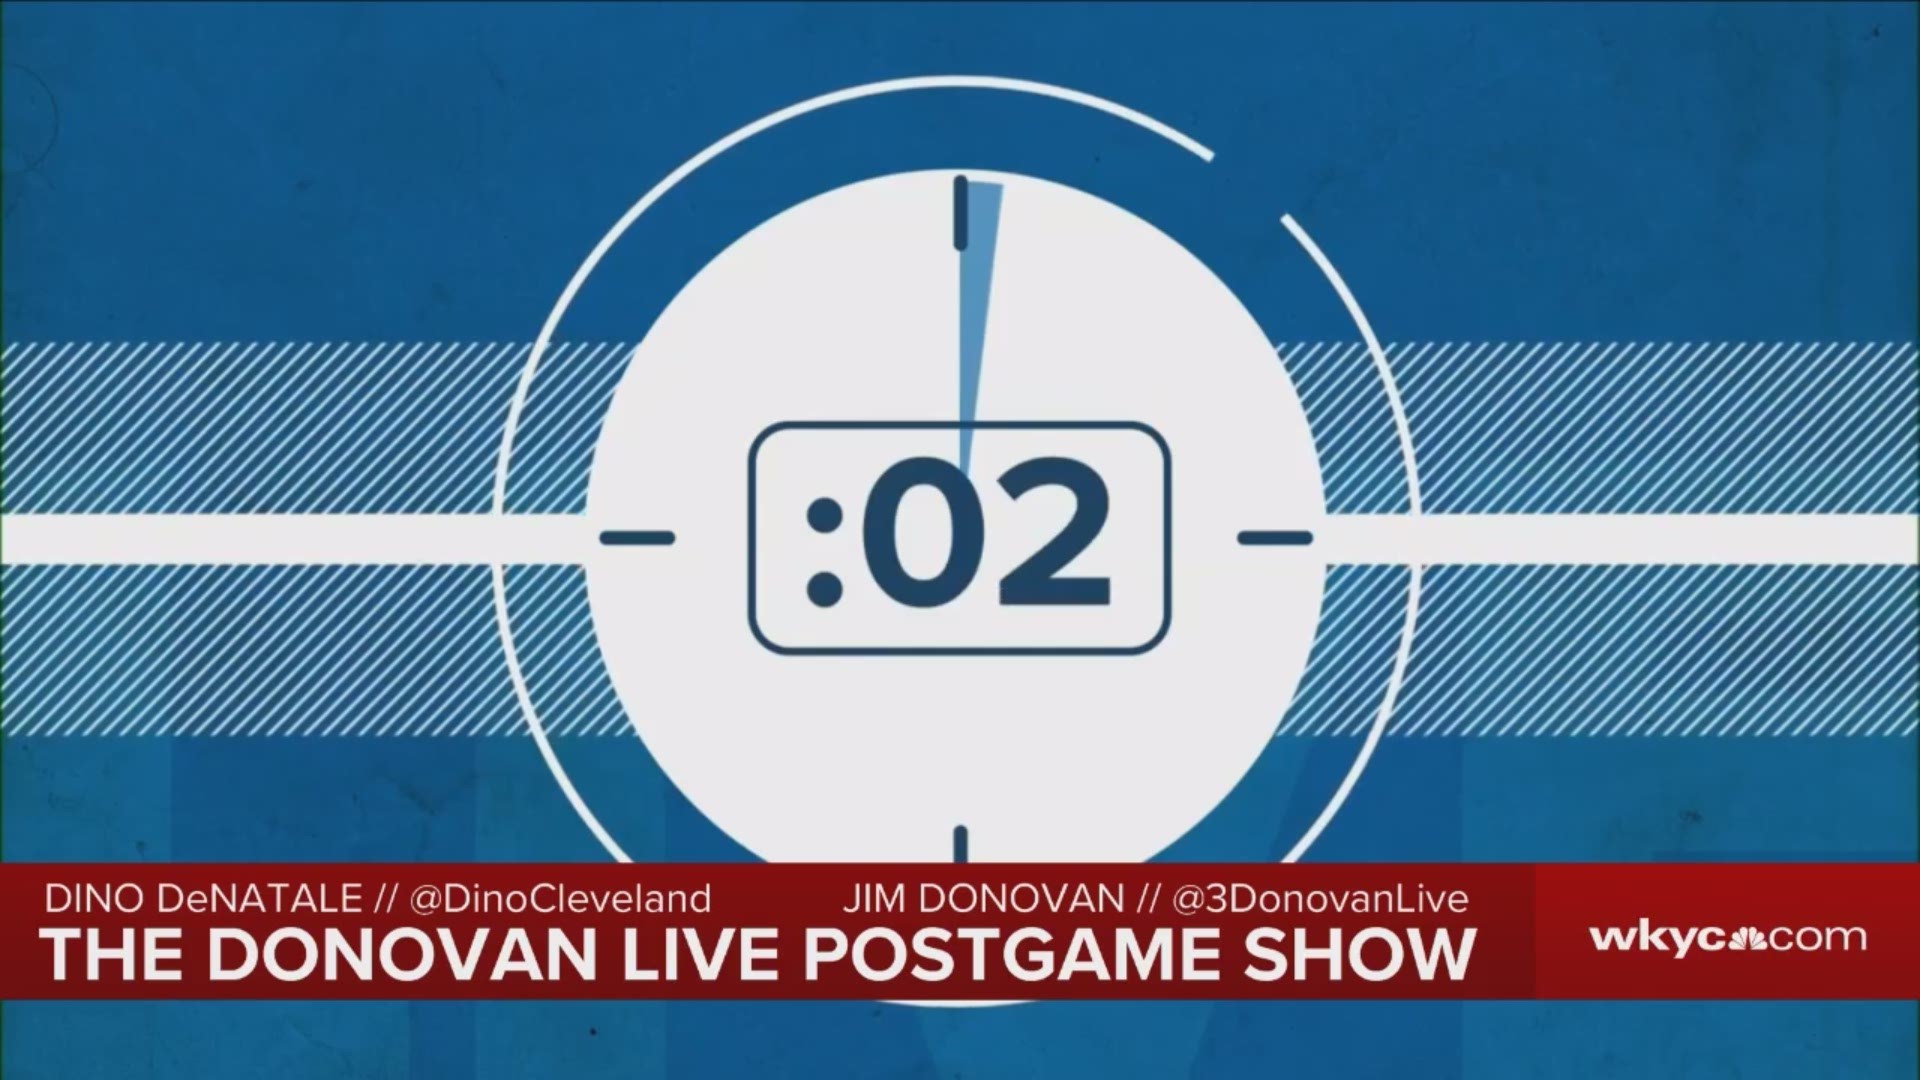 Is this a new era for the Cleveland Browns? Donovan Live Postgame Show